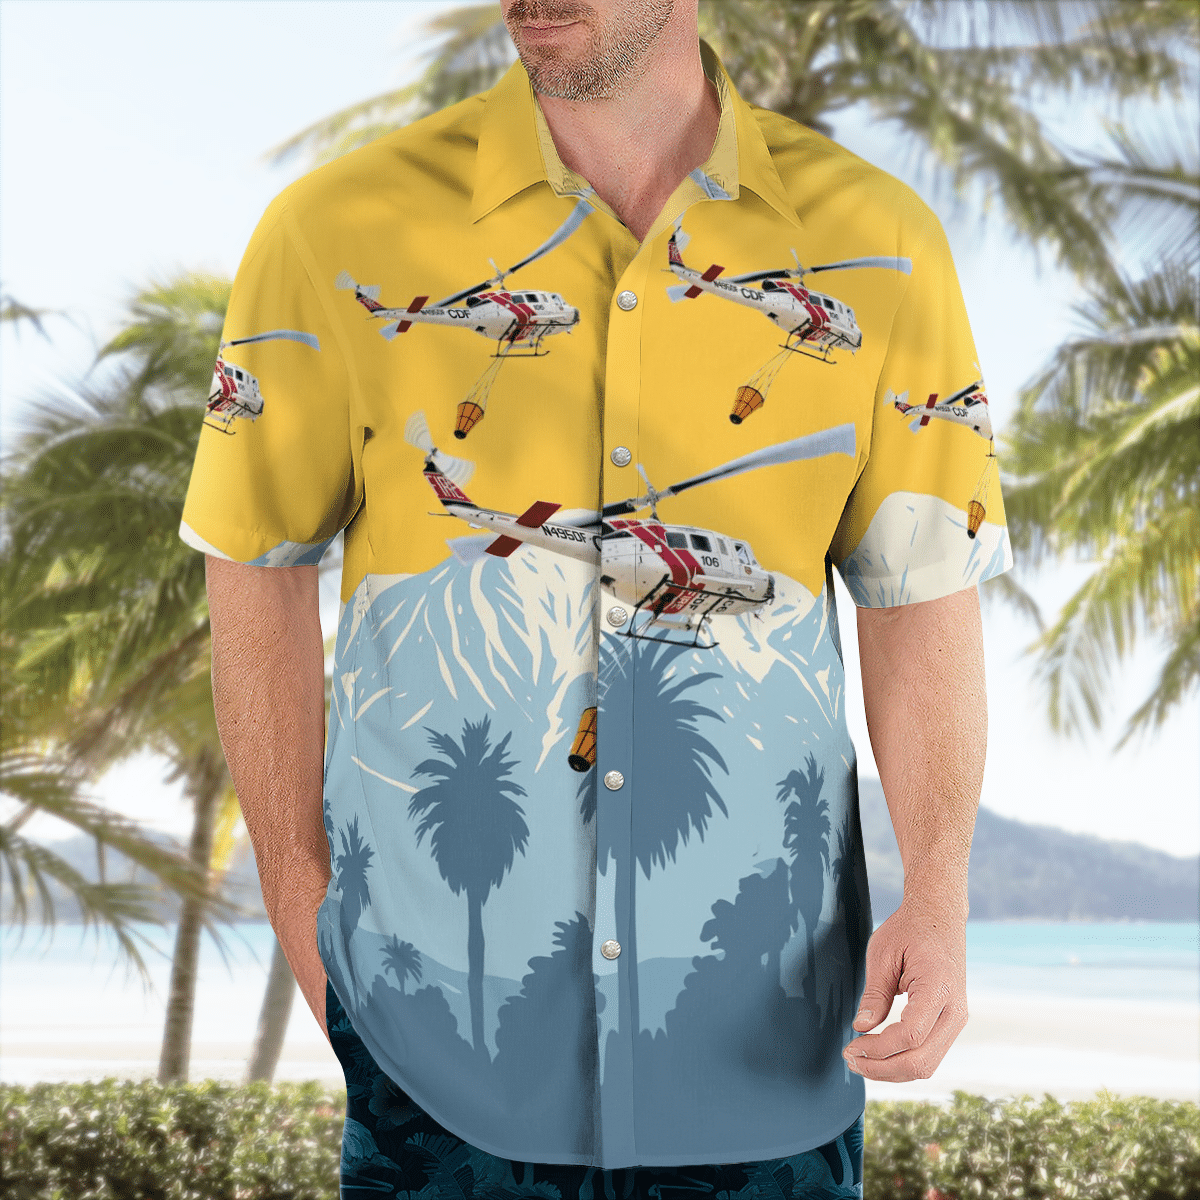 There are several styles of beach and Hawaiian shorts and tops to choose from 82